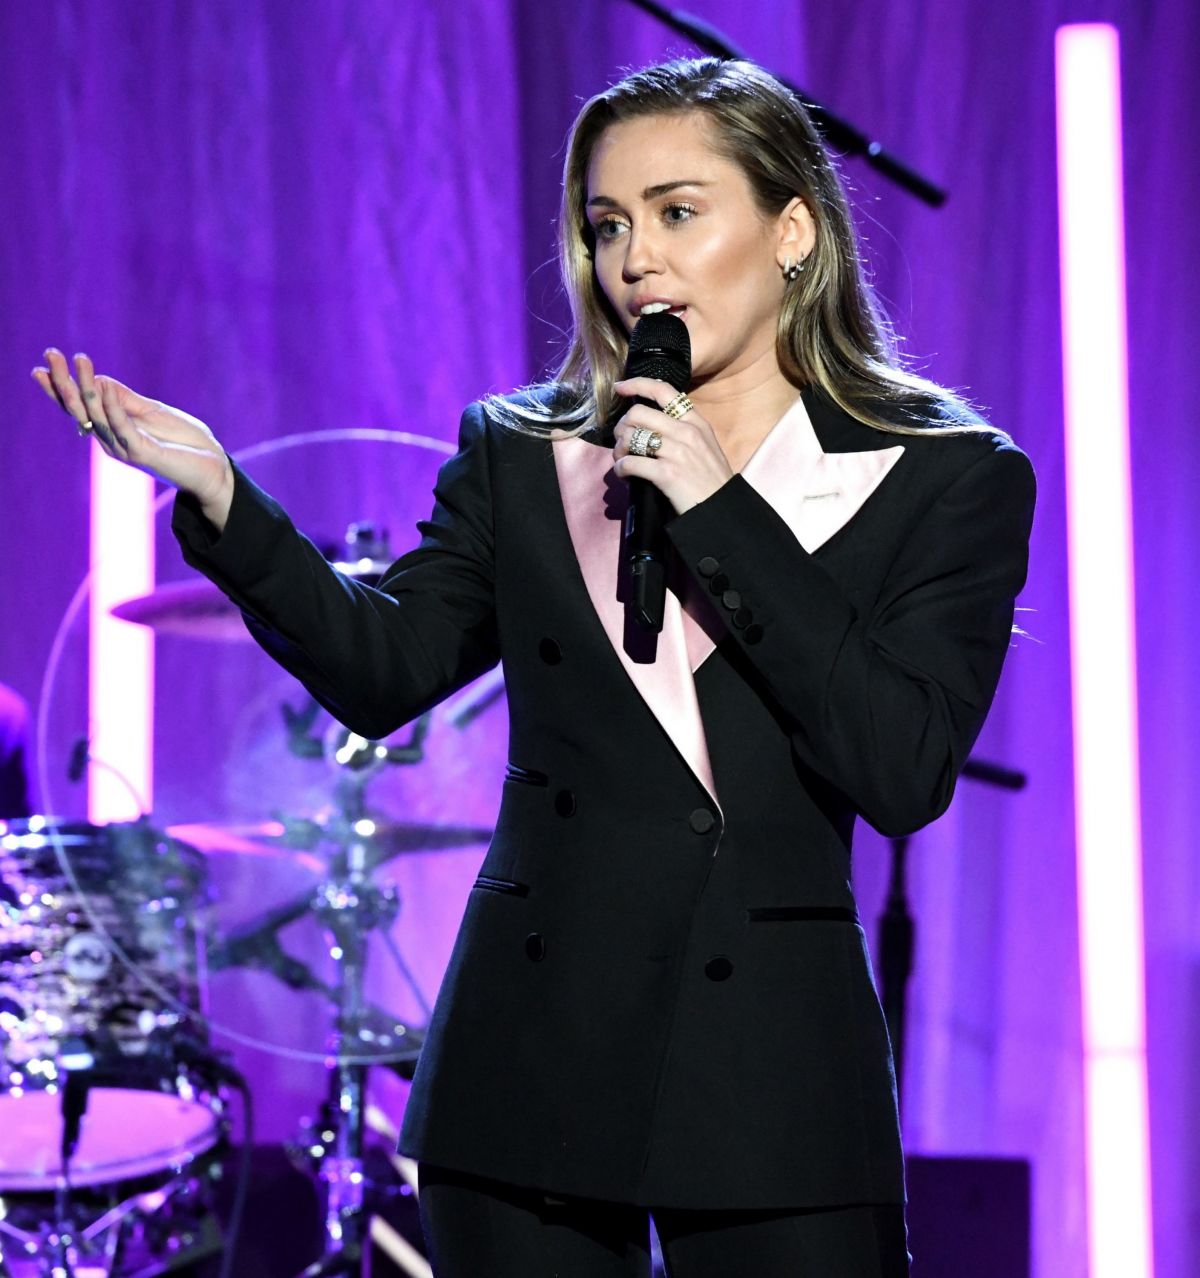 miley-cyrus-performs-at-women-s-cancer-research-fund-s-in-beverly-hills-02-28-2019-0.jpg